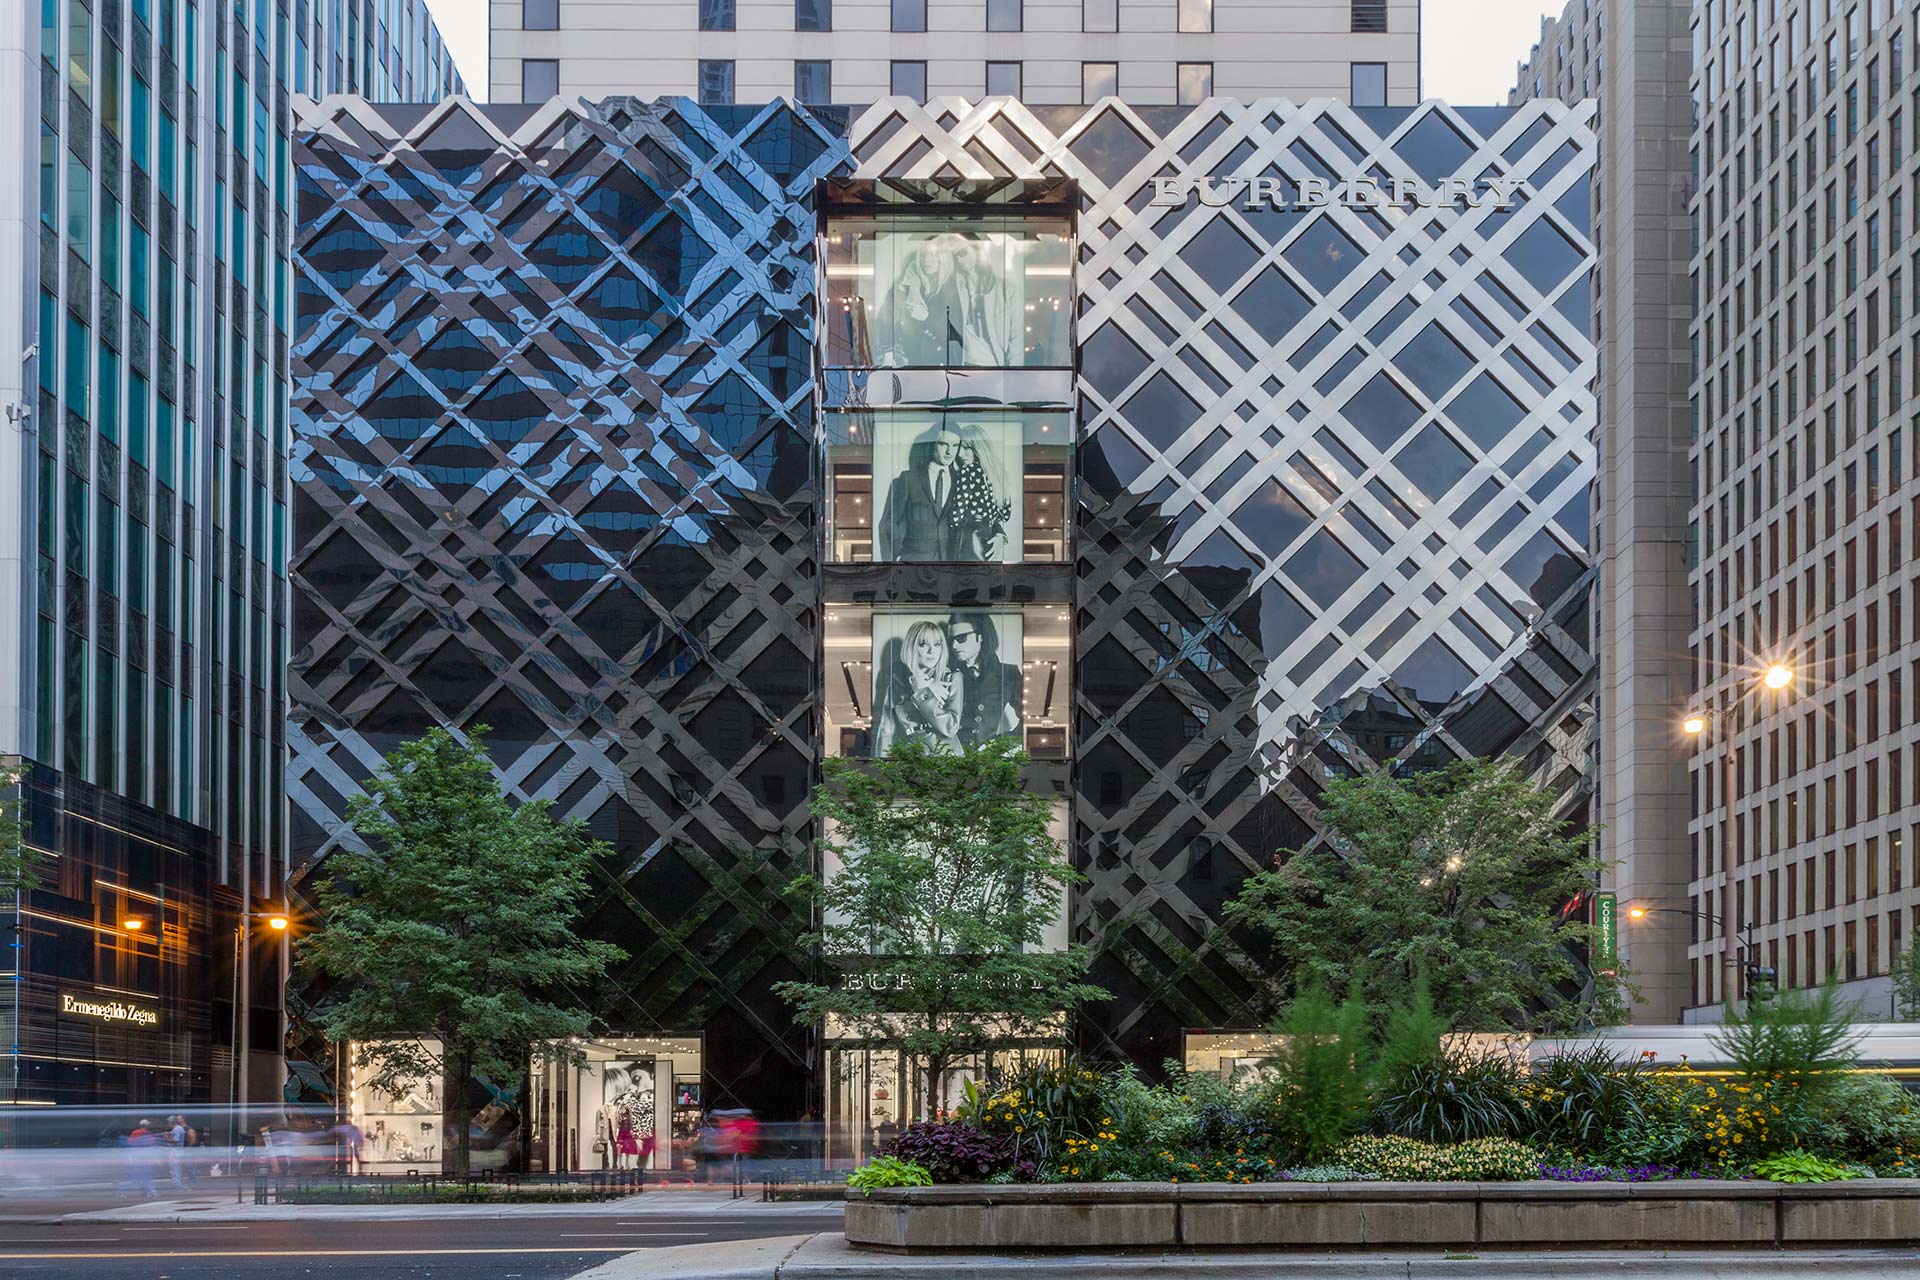 Zahner produced the complex facade for the new Burberry Flagship in Chicago, a deep-set fully developed facade integrated with exterior lighting systems.